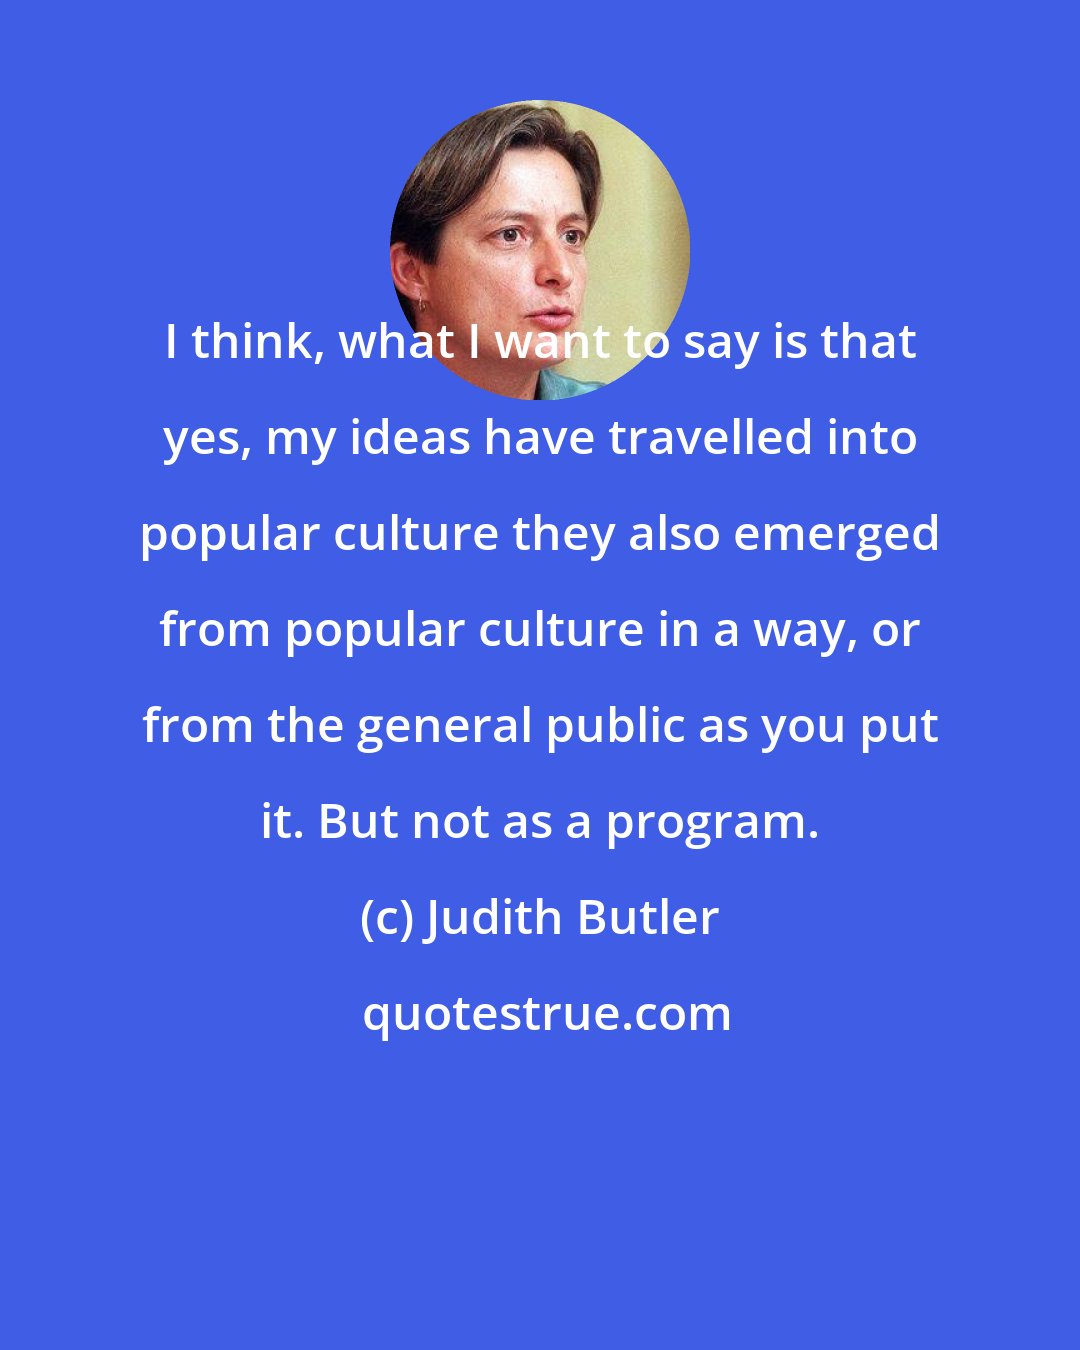 Judith Butler: I think, what I want to say is that yes, my ideas have travelled into popular culture they also emerged from popular culture in a way, or from the general public as you put it. But not as a program.